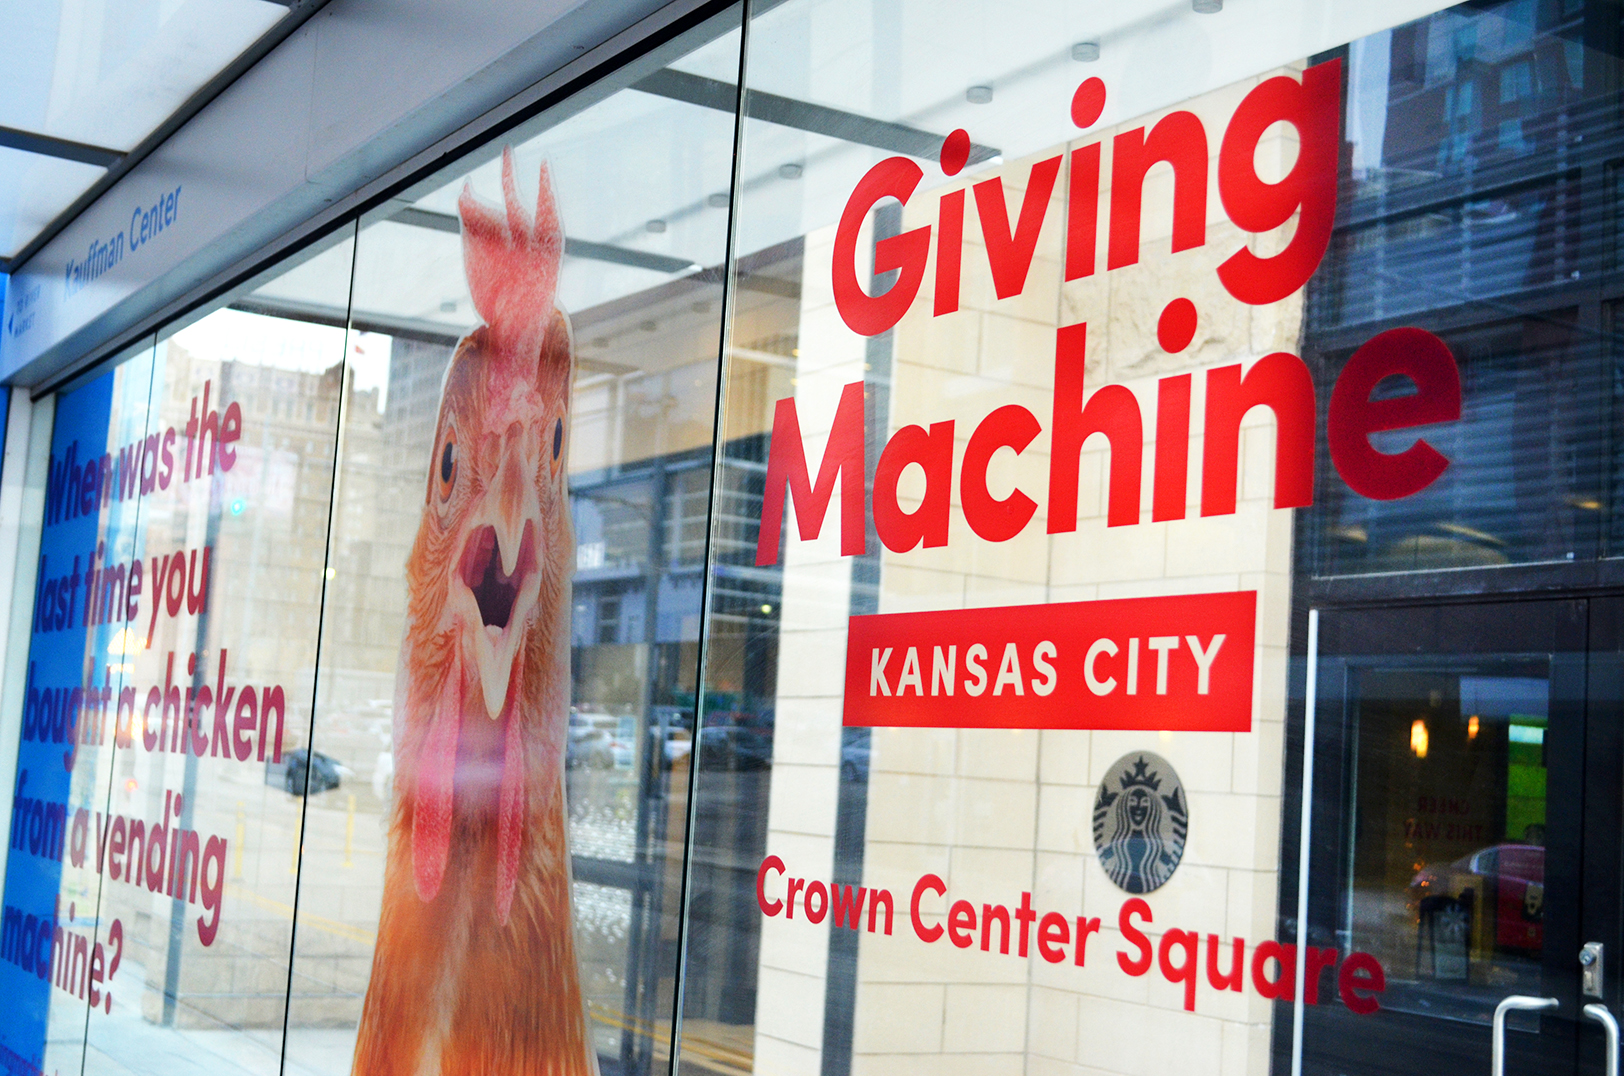 A service you never knew you needed: Buying chickens from a vending machine at the Mayor’s Christmas Tree